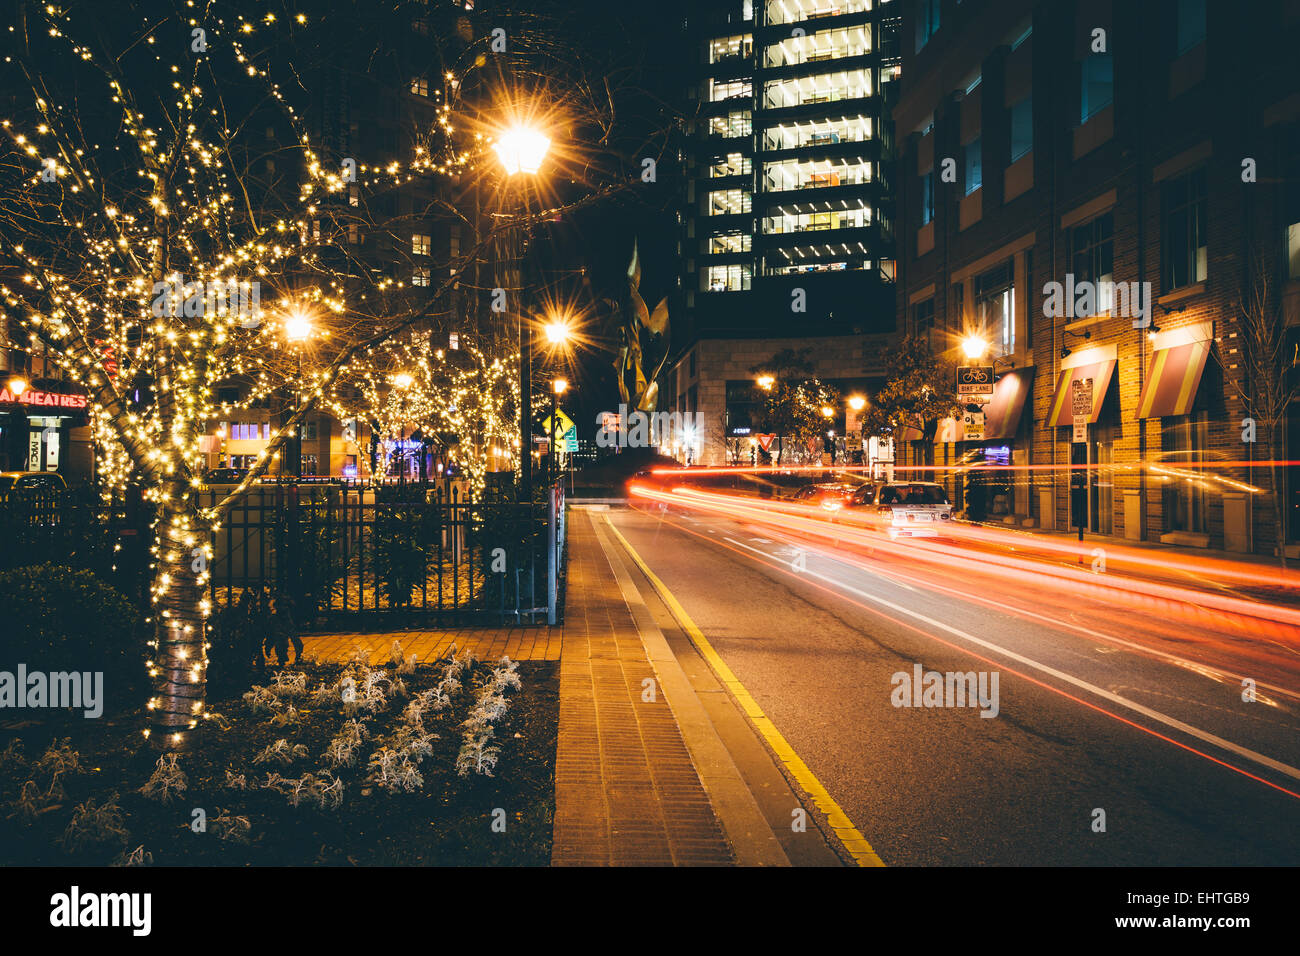 Christmas lights on trees and traffic along a street in Harbor East, Baltimore, Maryland. Stock Photo